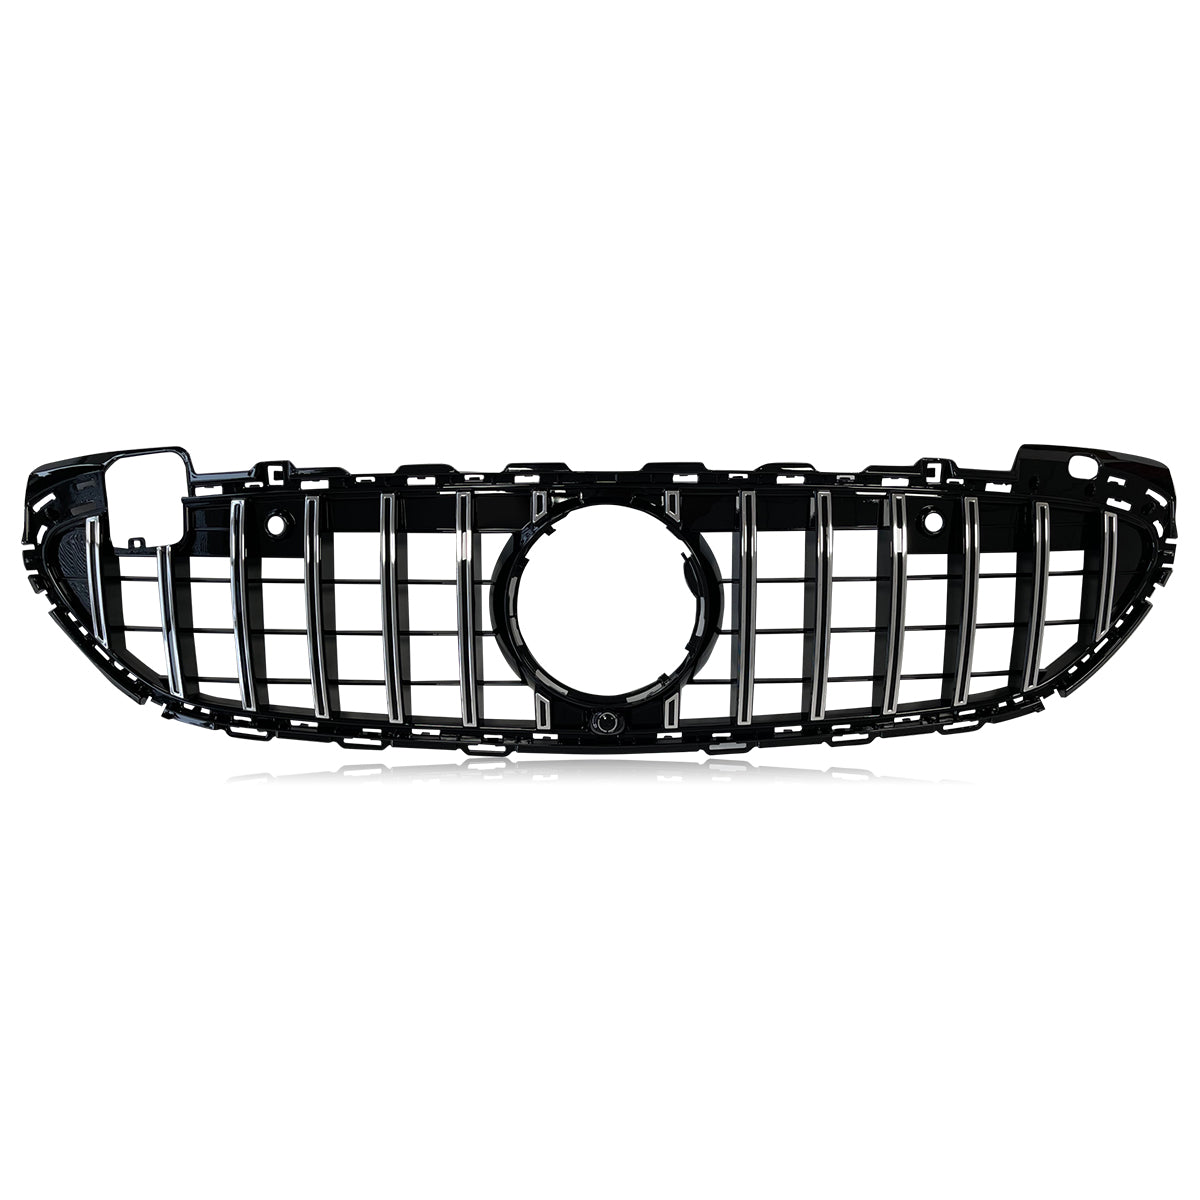 GT STYLE GRILLE FOR C-CLASS W206 2022+